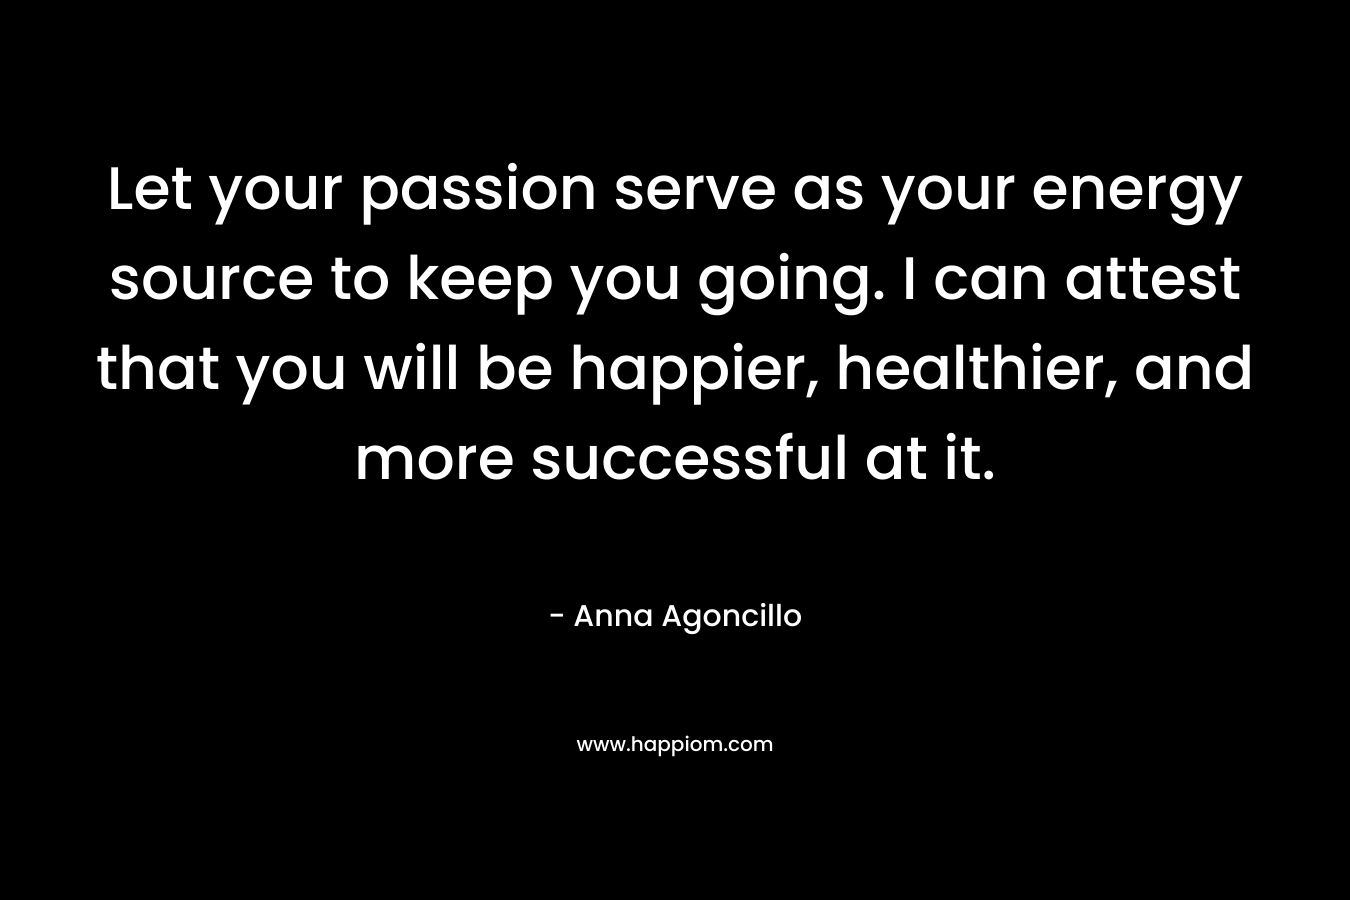 Let your passion serve as your energy source to keep you going. I can attest that you will be happier, healthier, and more successful at it.